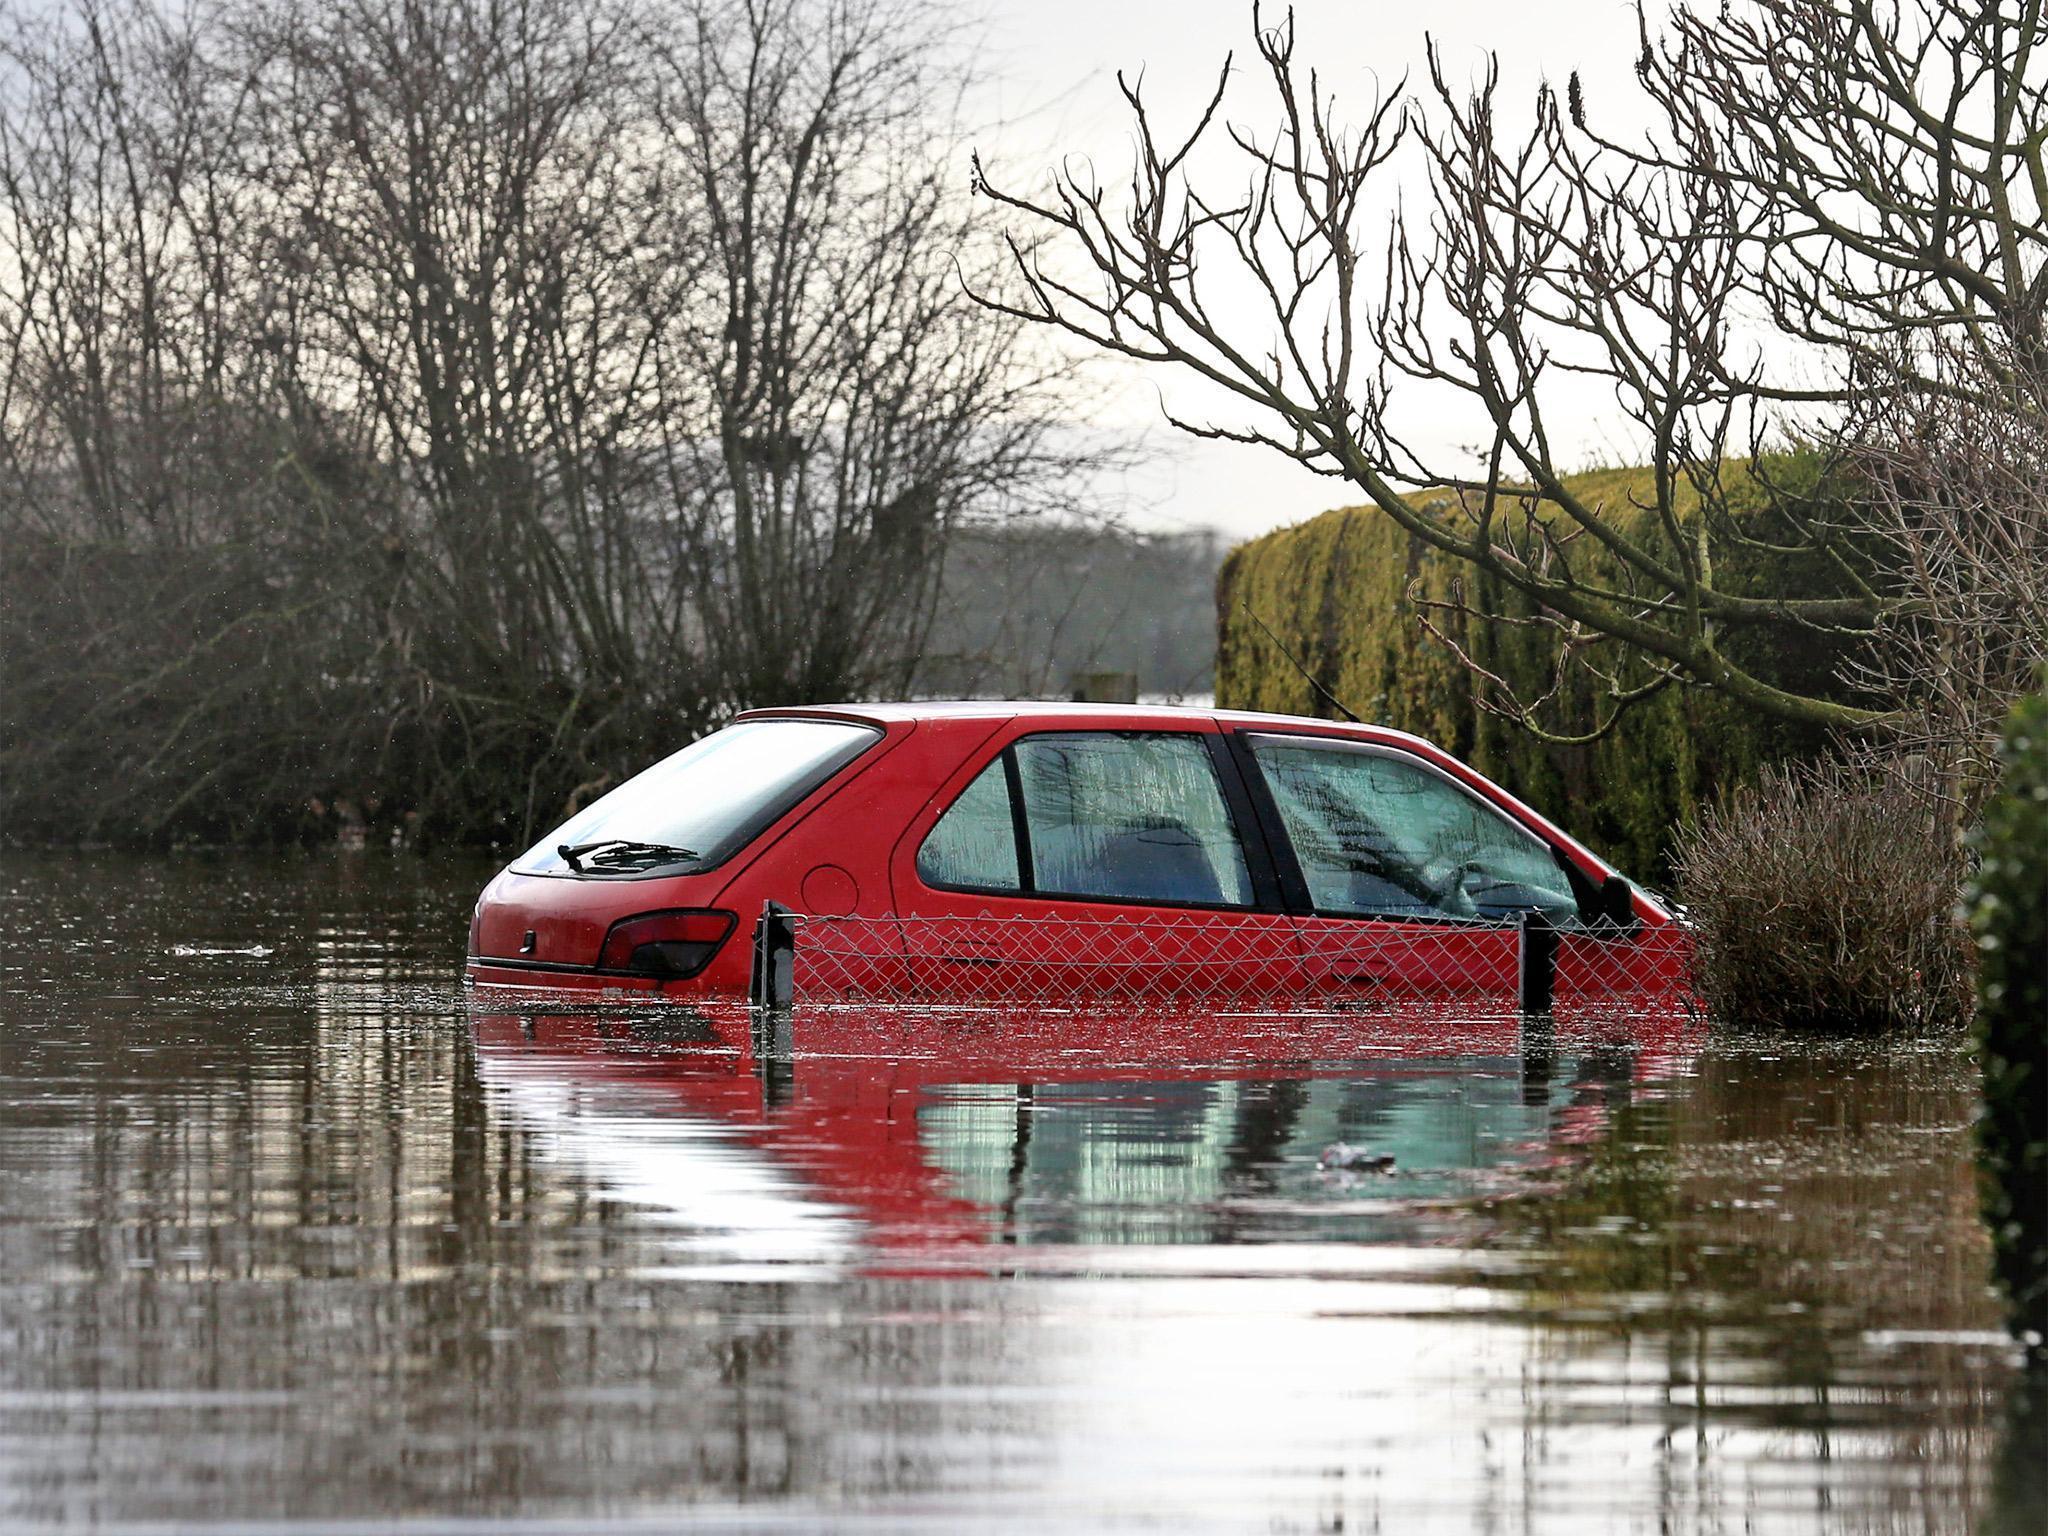 Quindell deals in insurance claims but now faces its own sink or swim situation